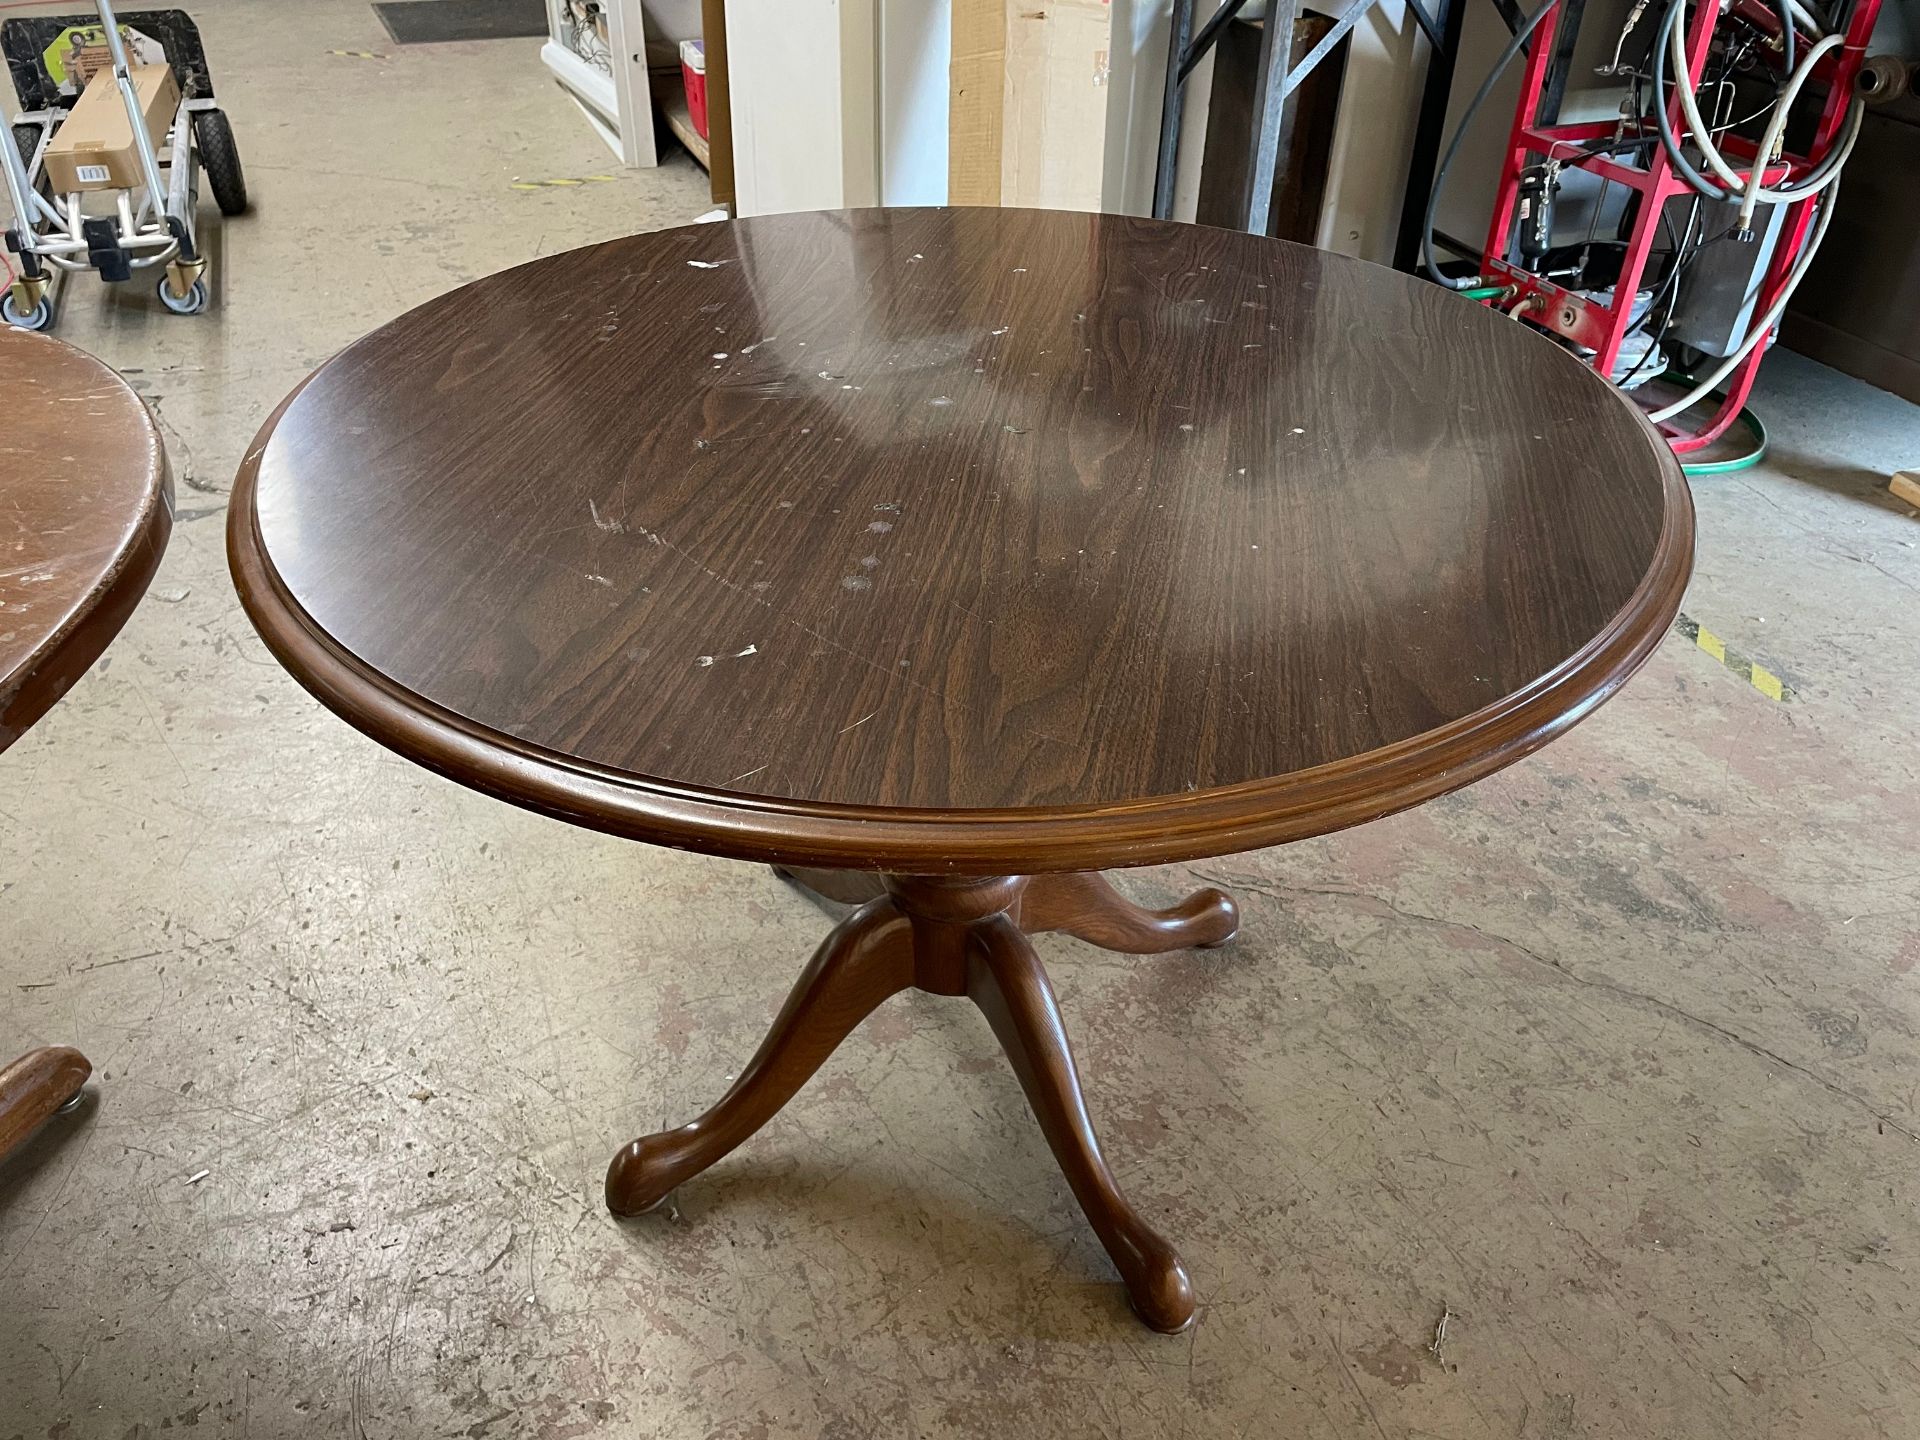 Lot with (2) Wooden Round Tables - Image 2 of 3